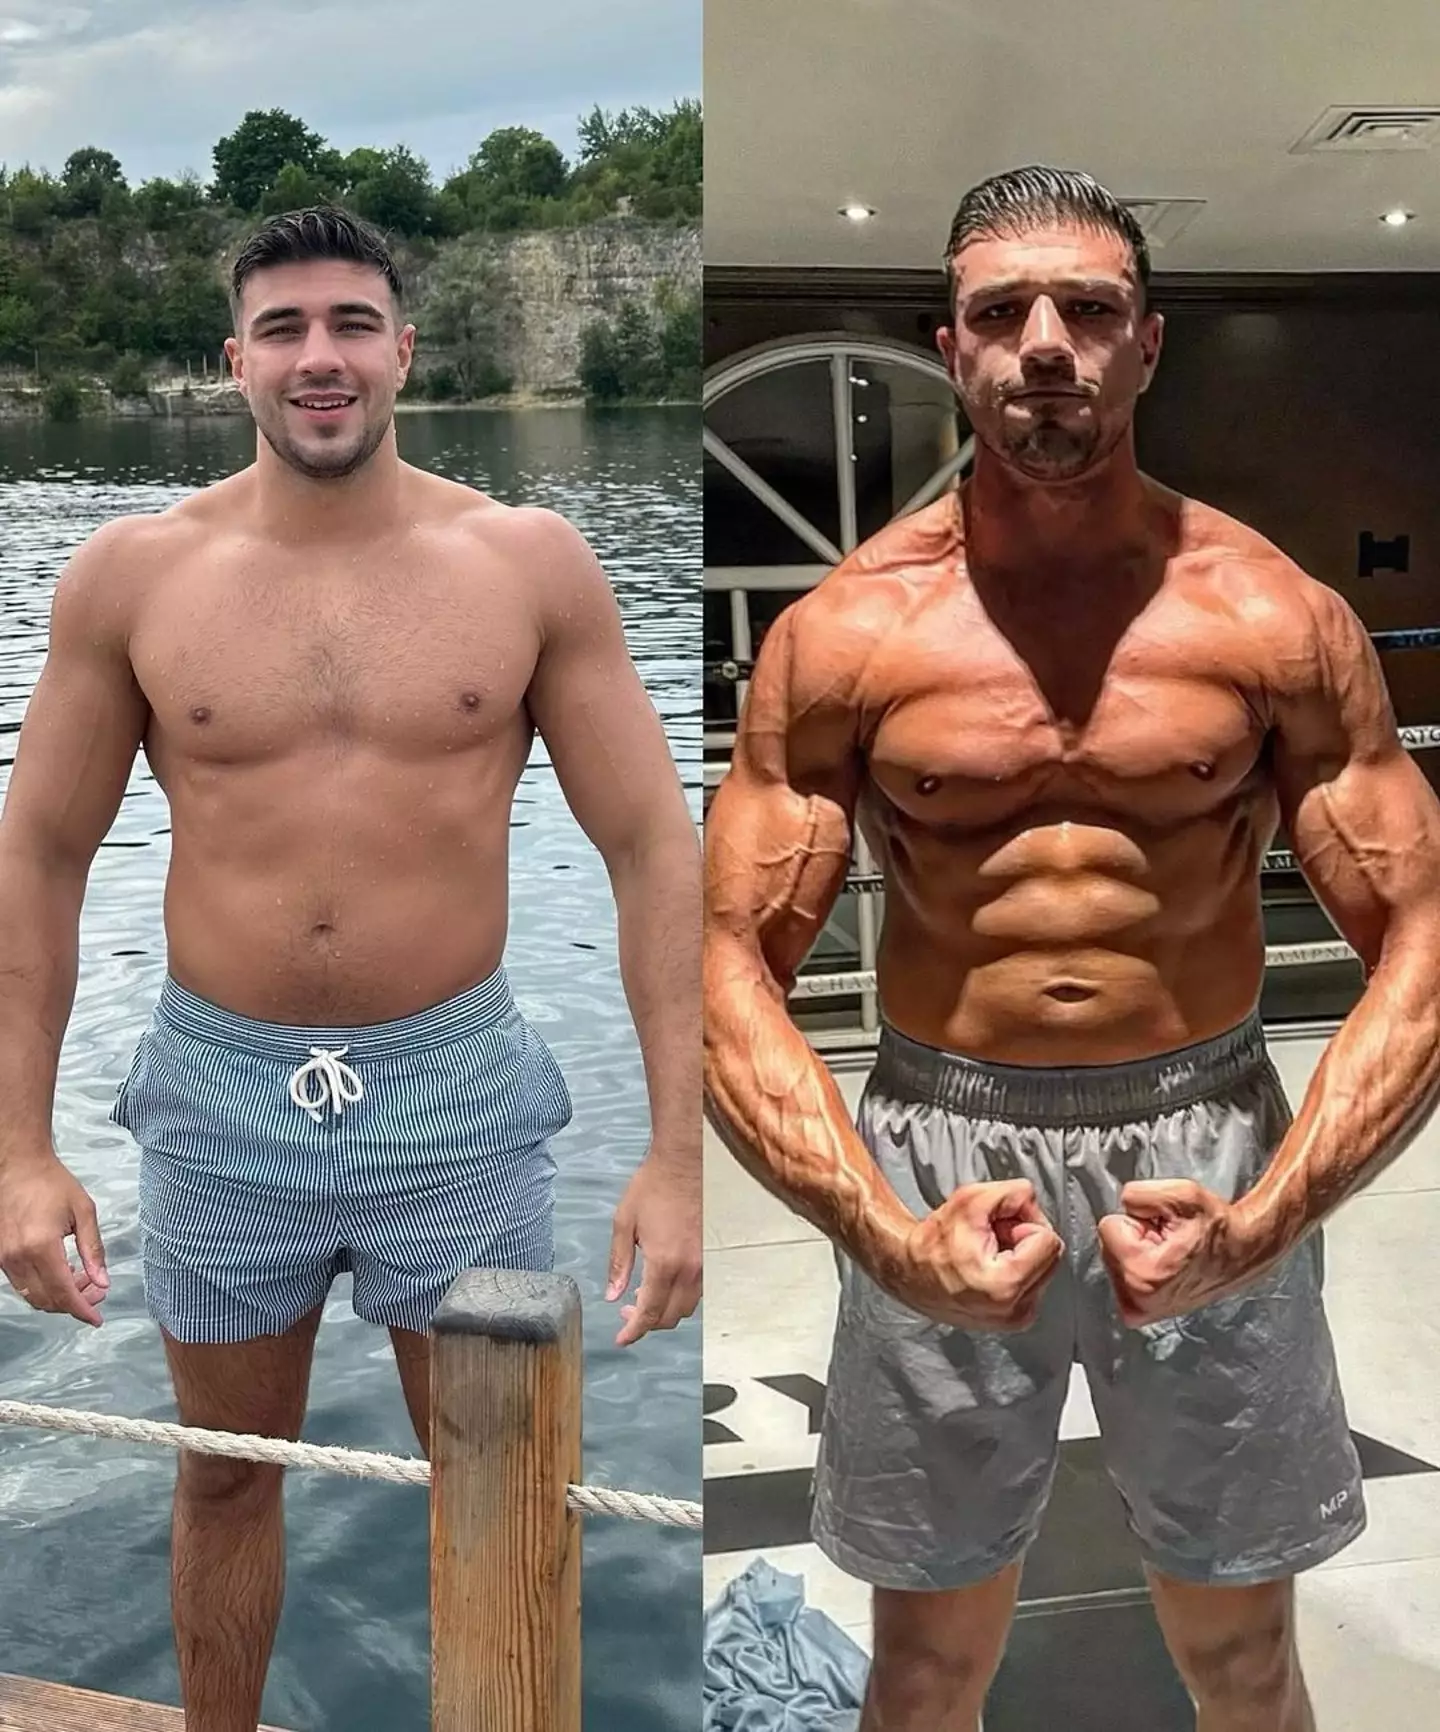 Here's Tommy's latest transformation.